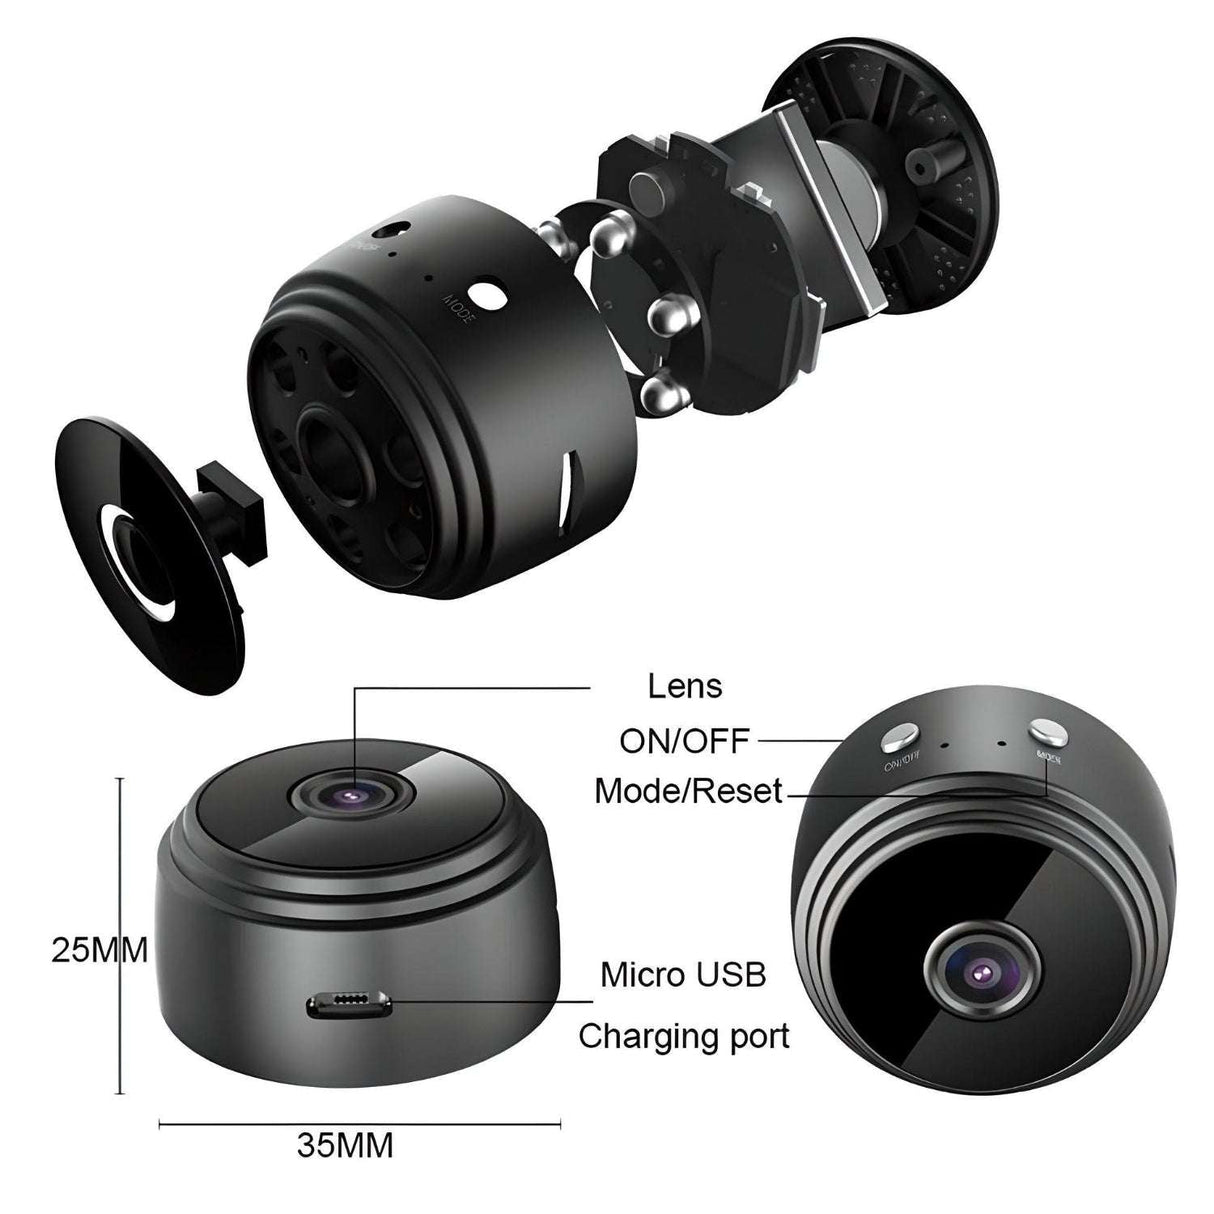 Wireless Eye: HD Magnetic Night Vision Security Camera HOME & OFFICE surveillance camera